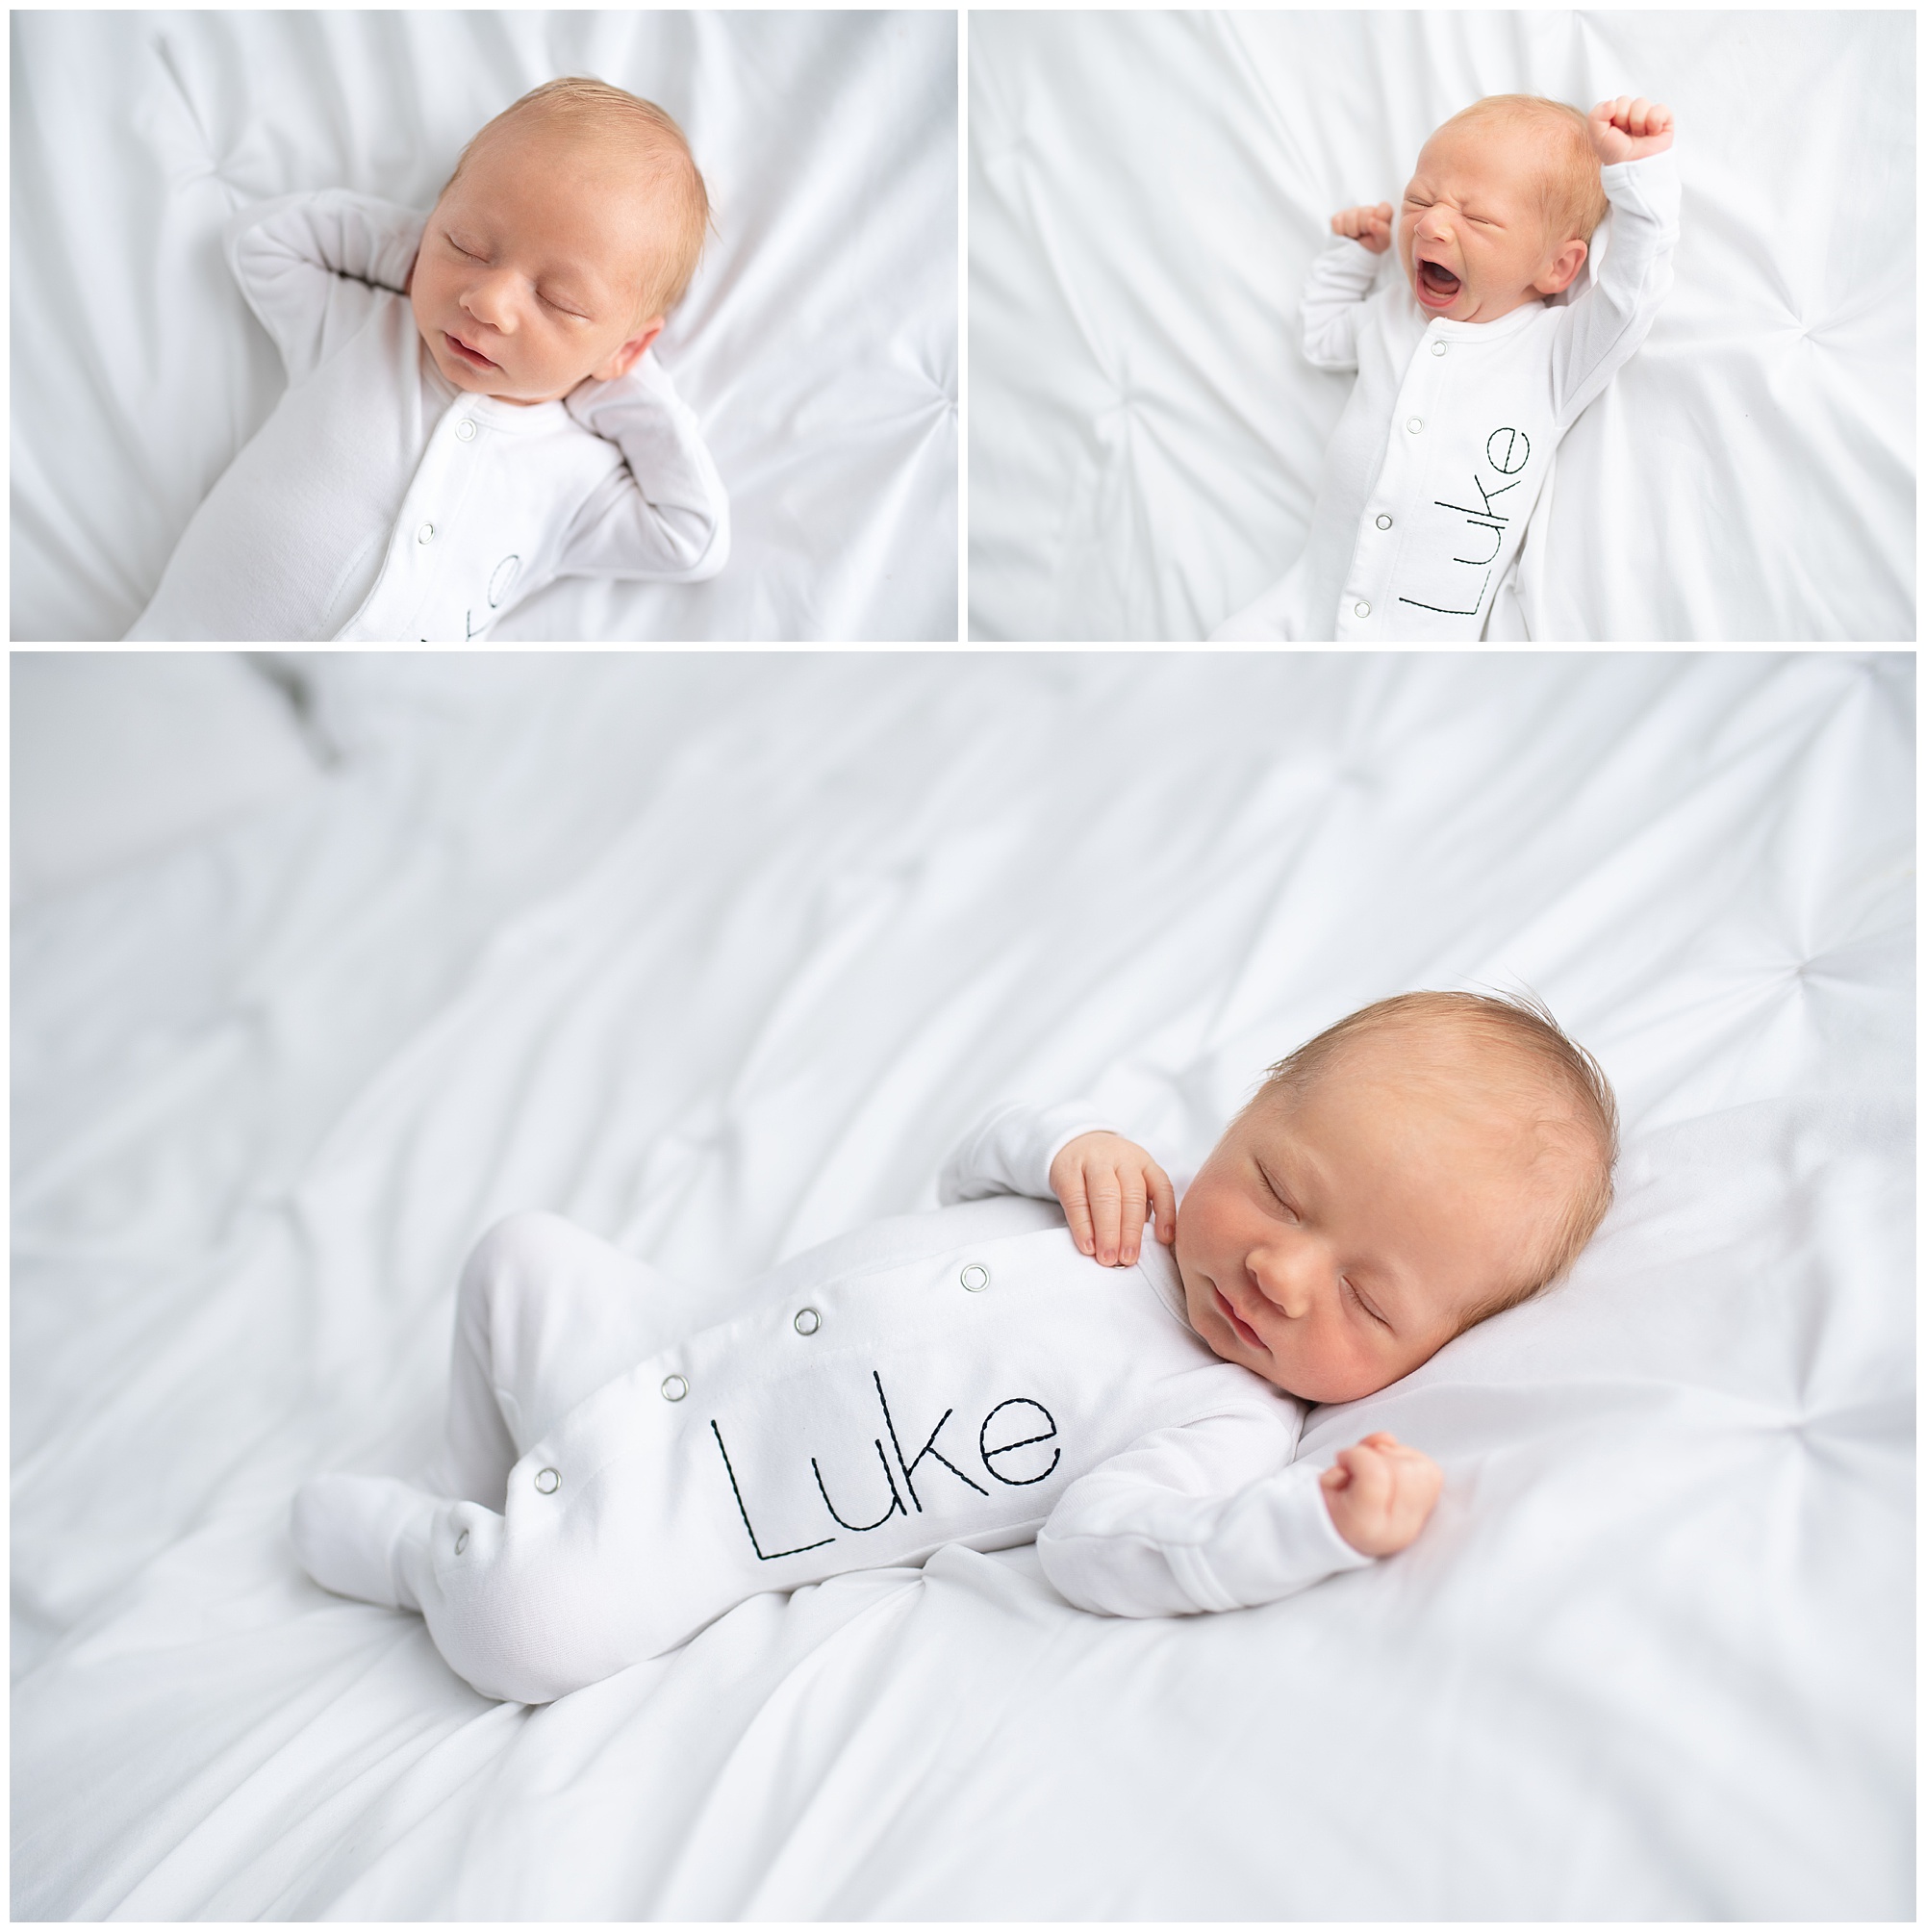 baby Luke stretching during his newborn photo session in the studio